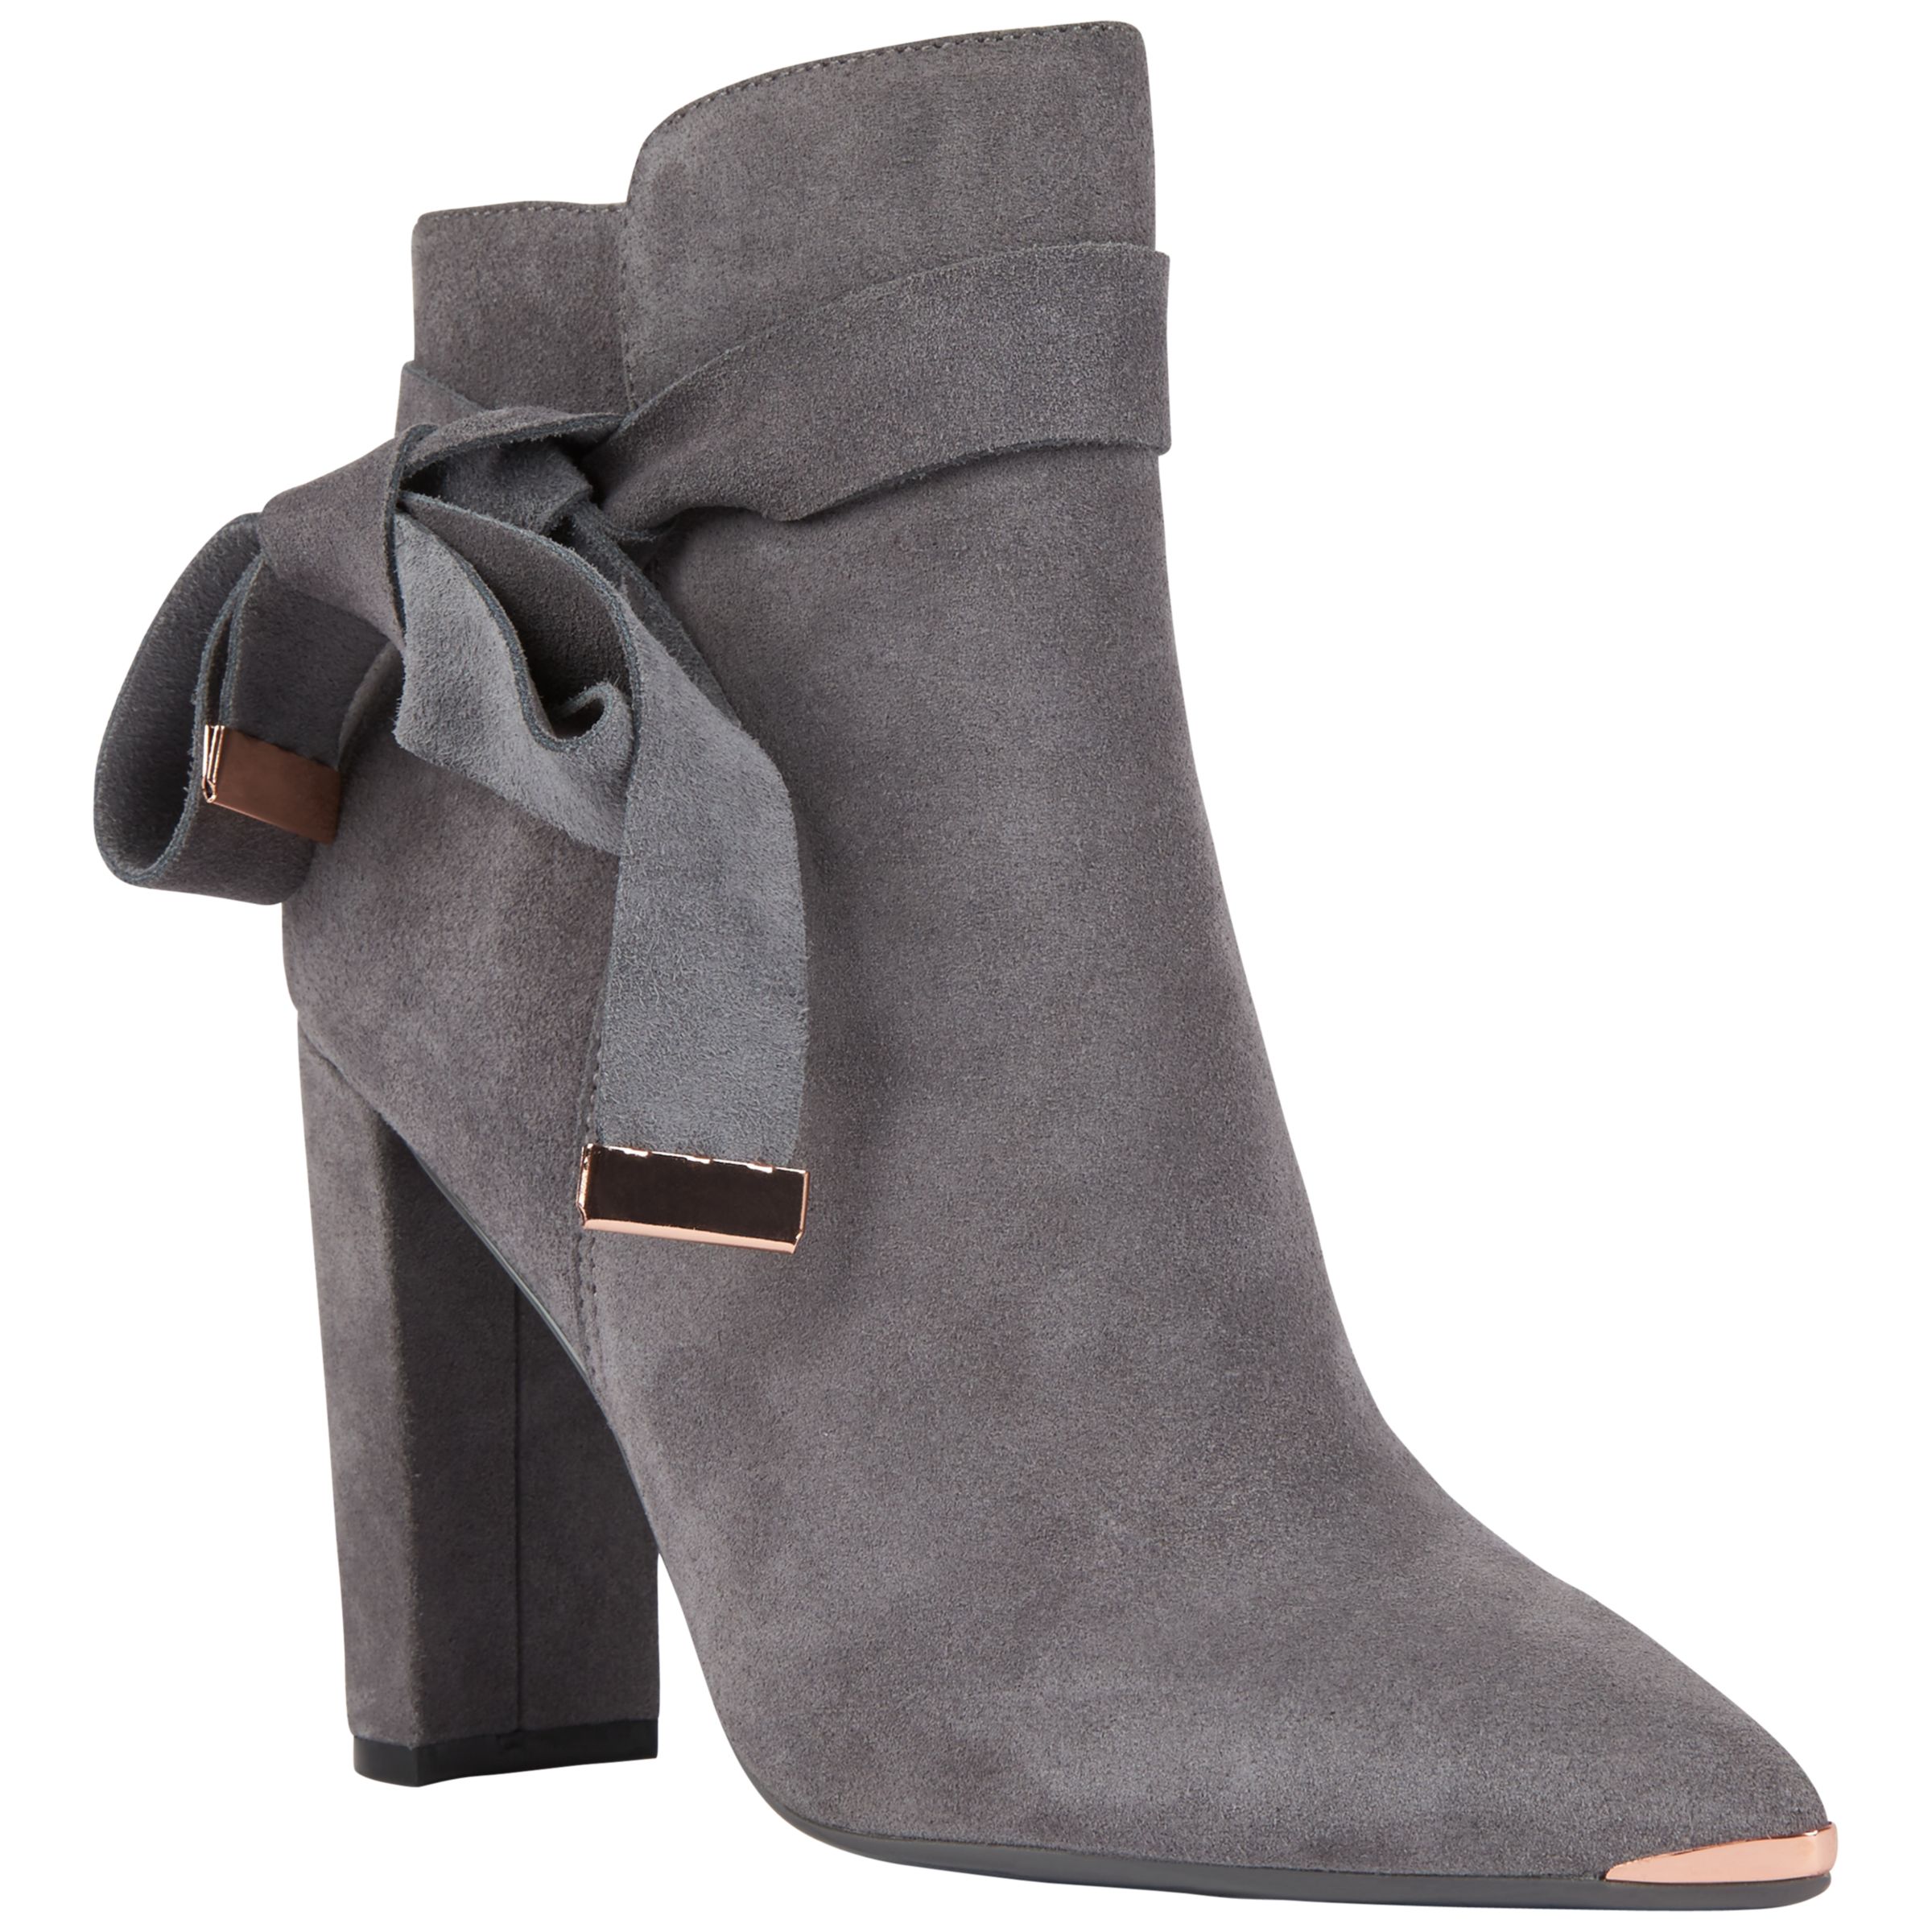 Ted Baker Sailly Block Heel Boots at John Lewis & Partners